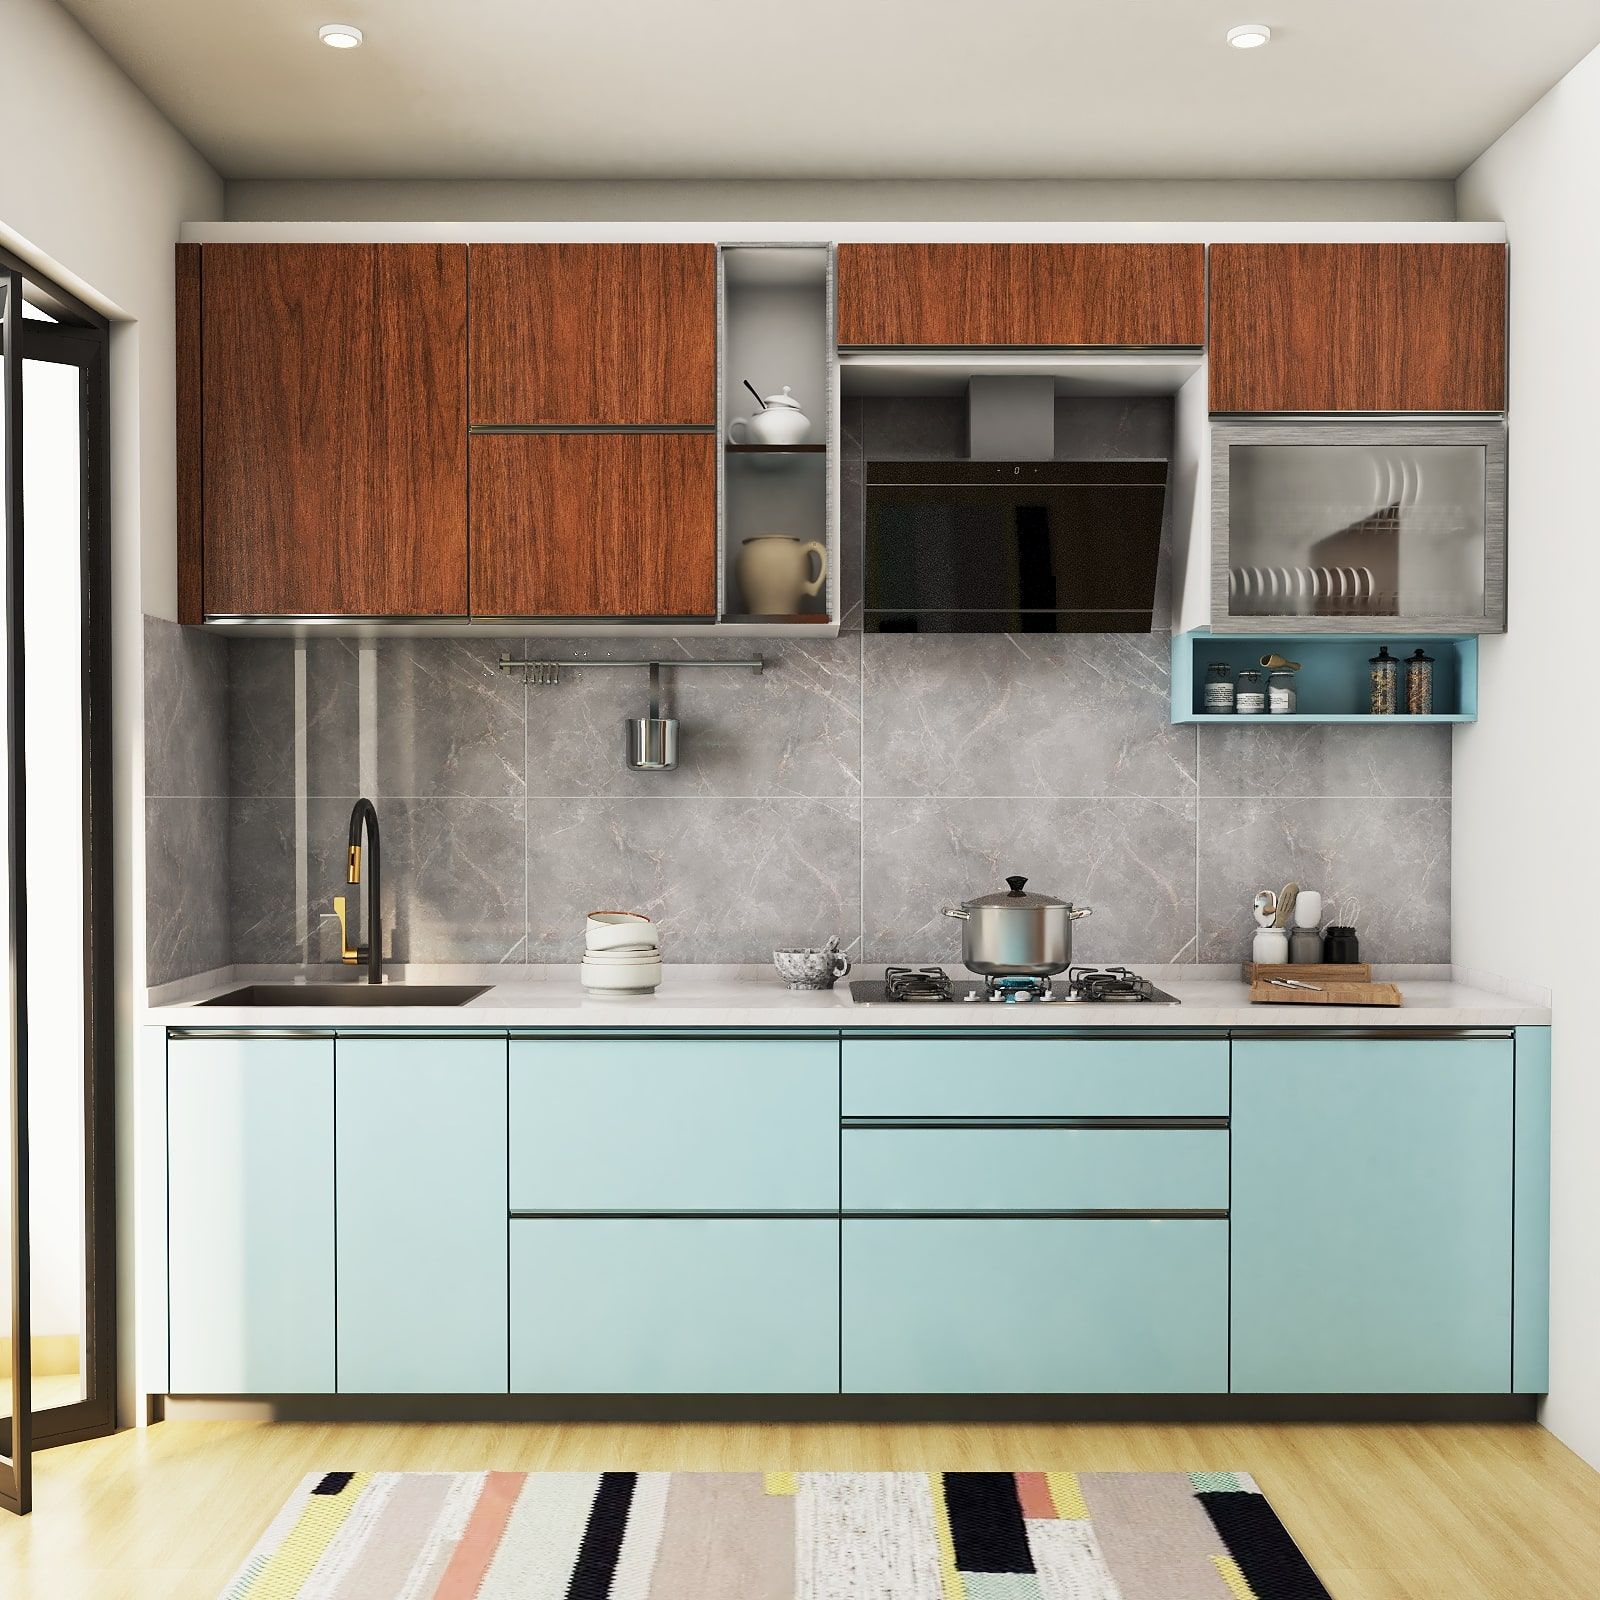 Contemporary Parallel Modular Kitchen Design In Blue And Wood